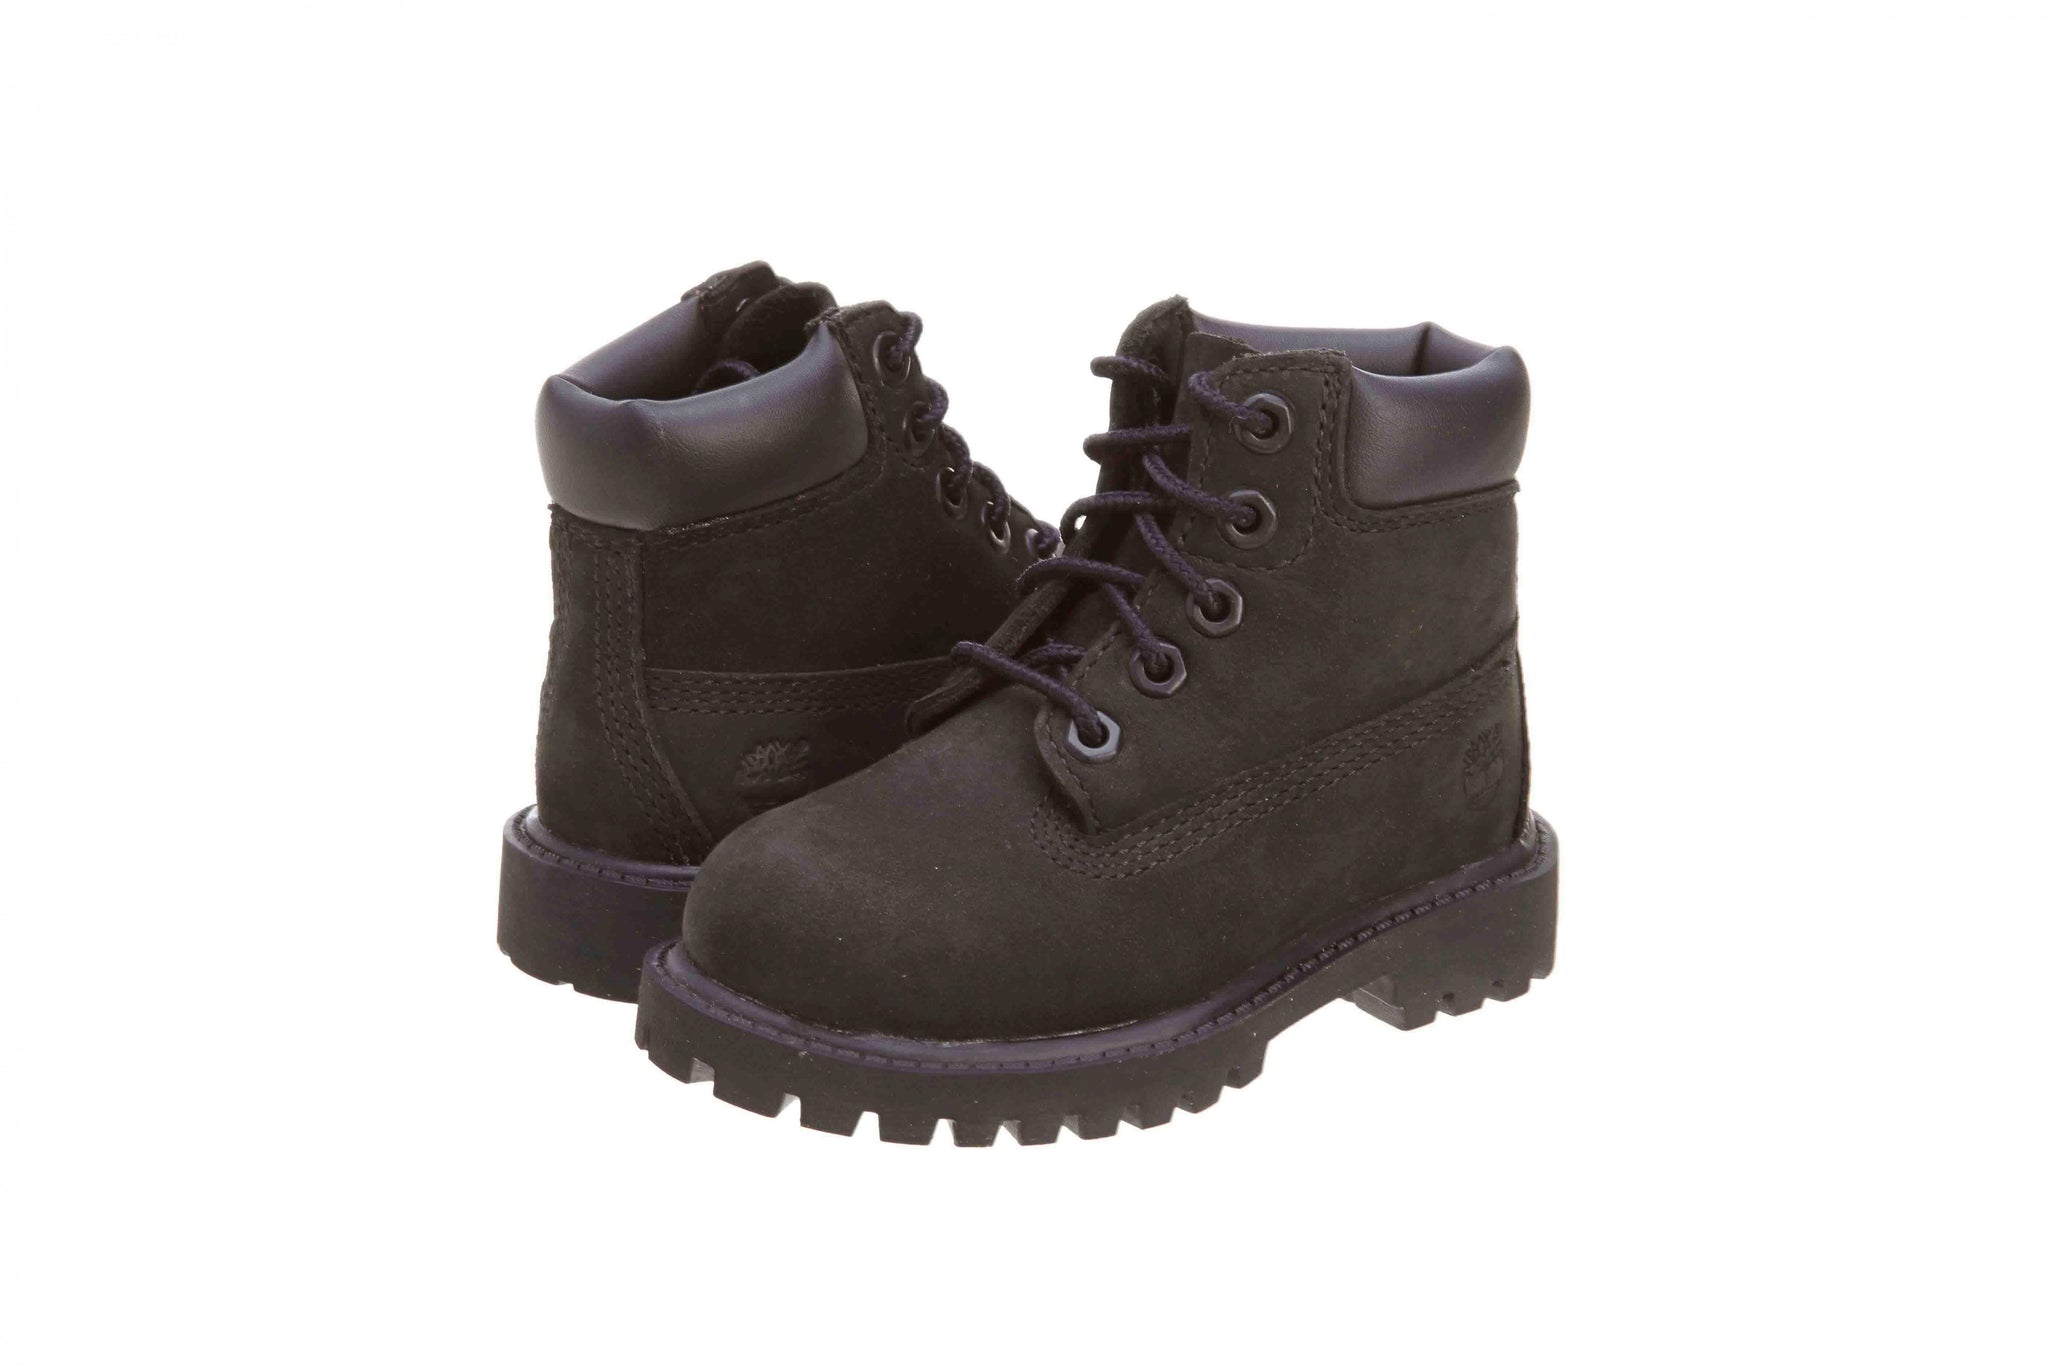 Timberland 6" Premium Toddlers Boots Style # 12807